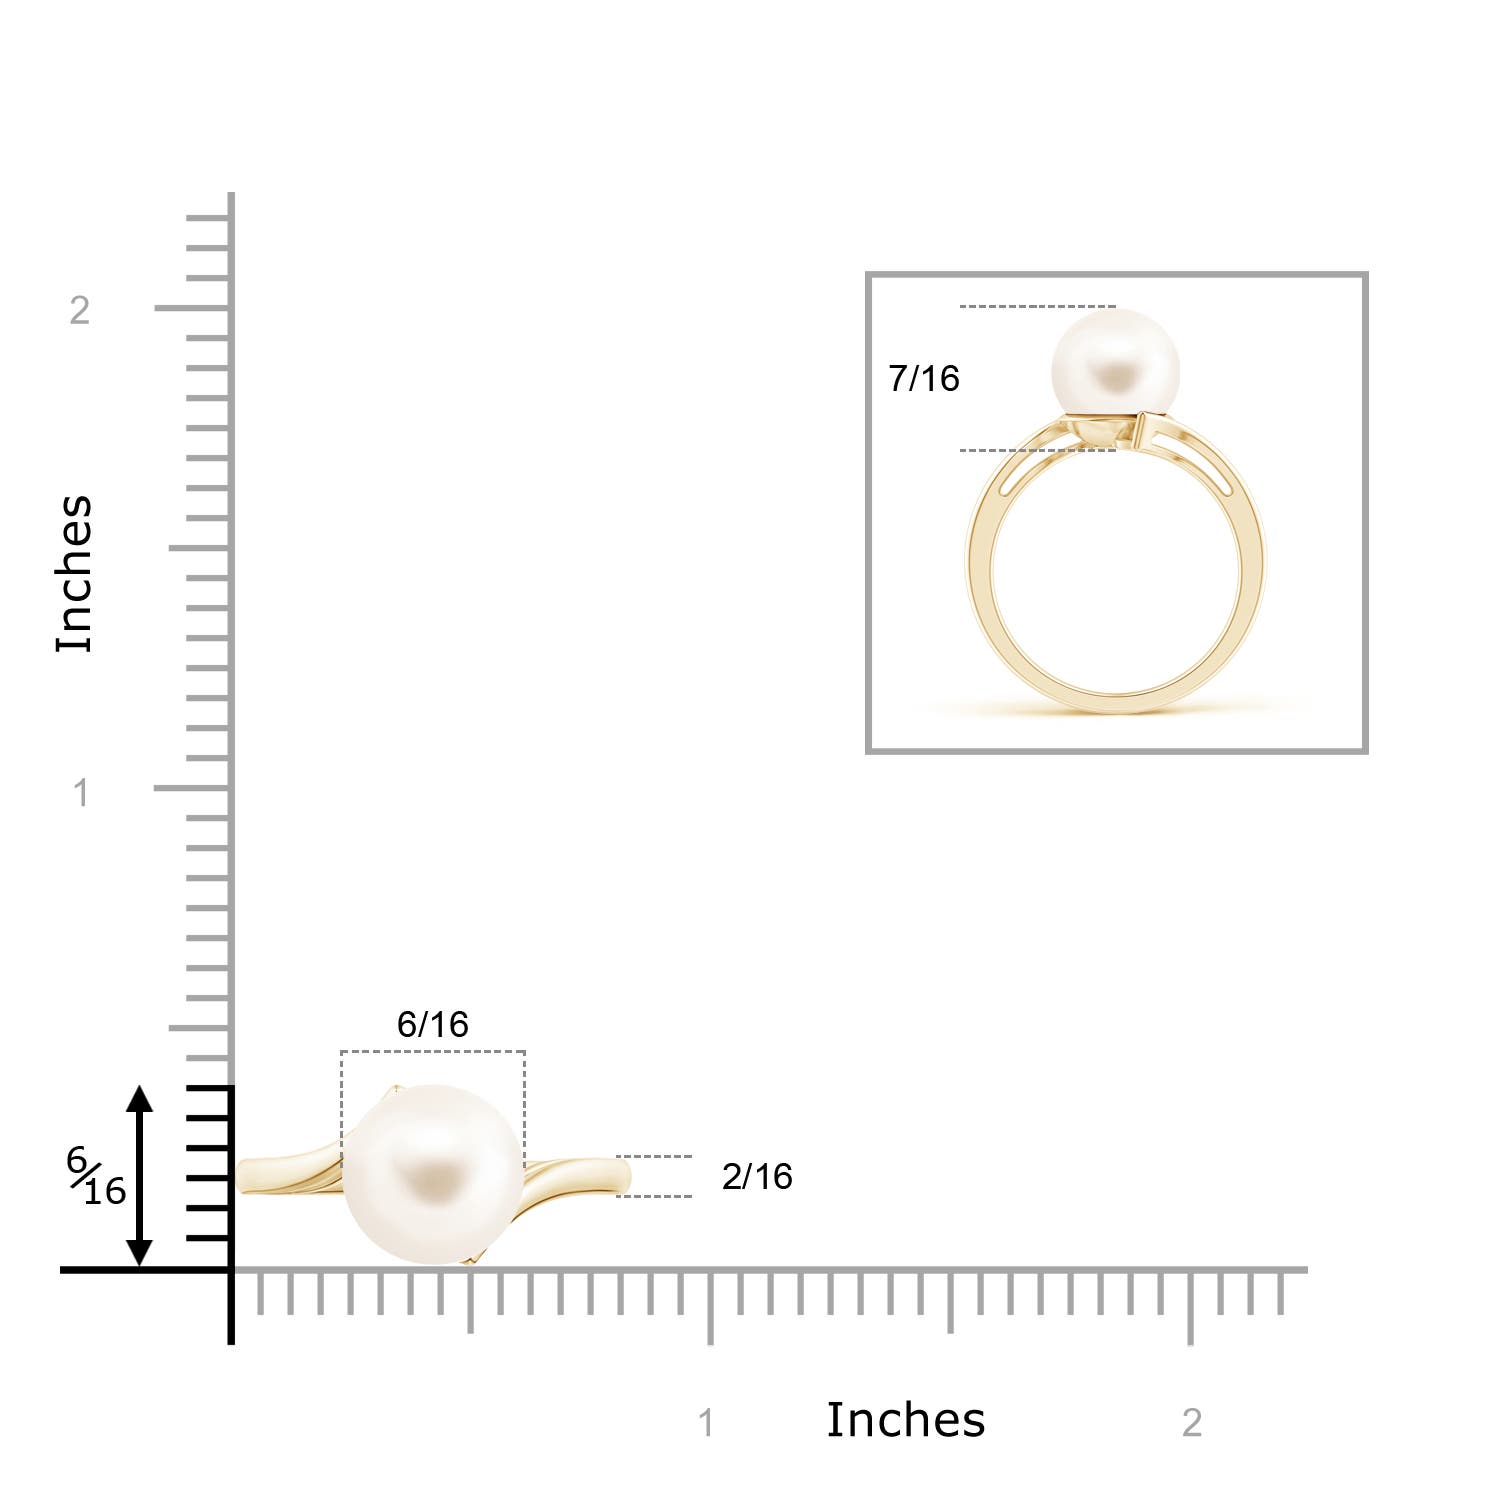 AAA / 7.2 CT / 14 KT Yellow Gold